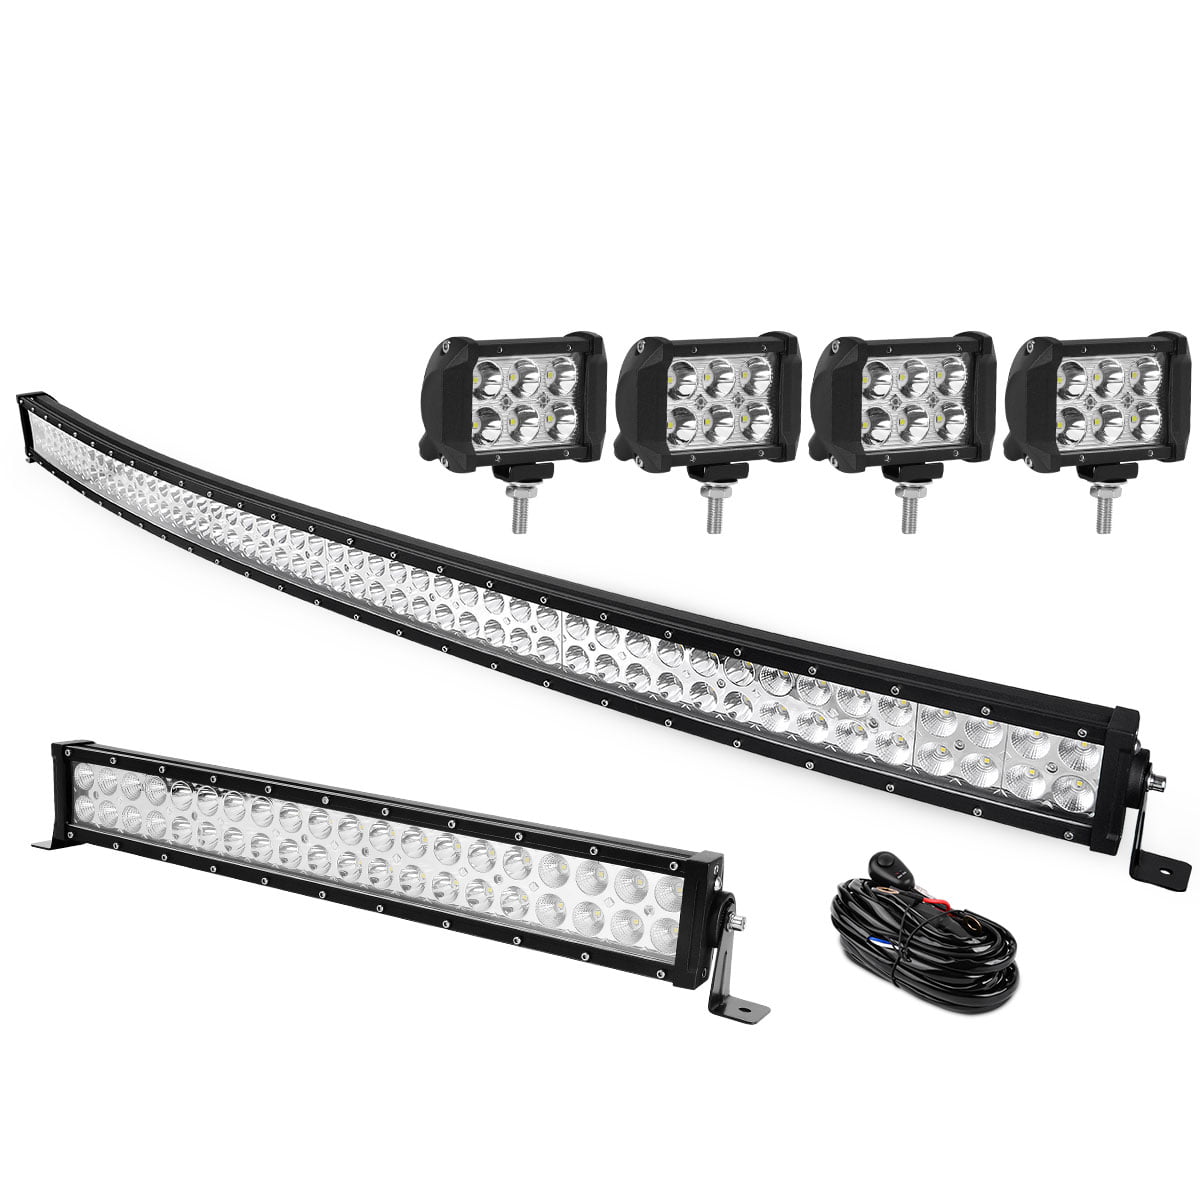 Curved 52 inch LED Light Bar 900W 9D Combo Offroad SUV Tractor ATV Driving 52"